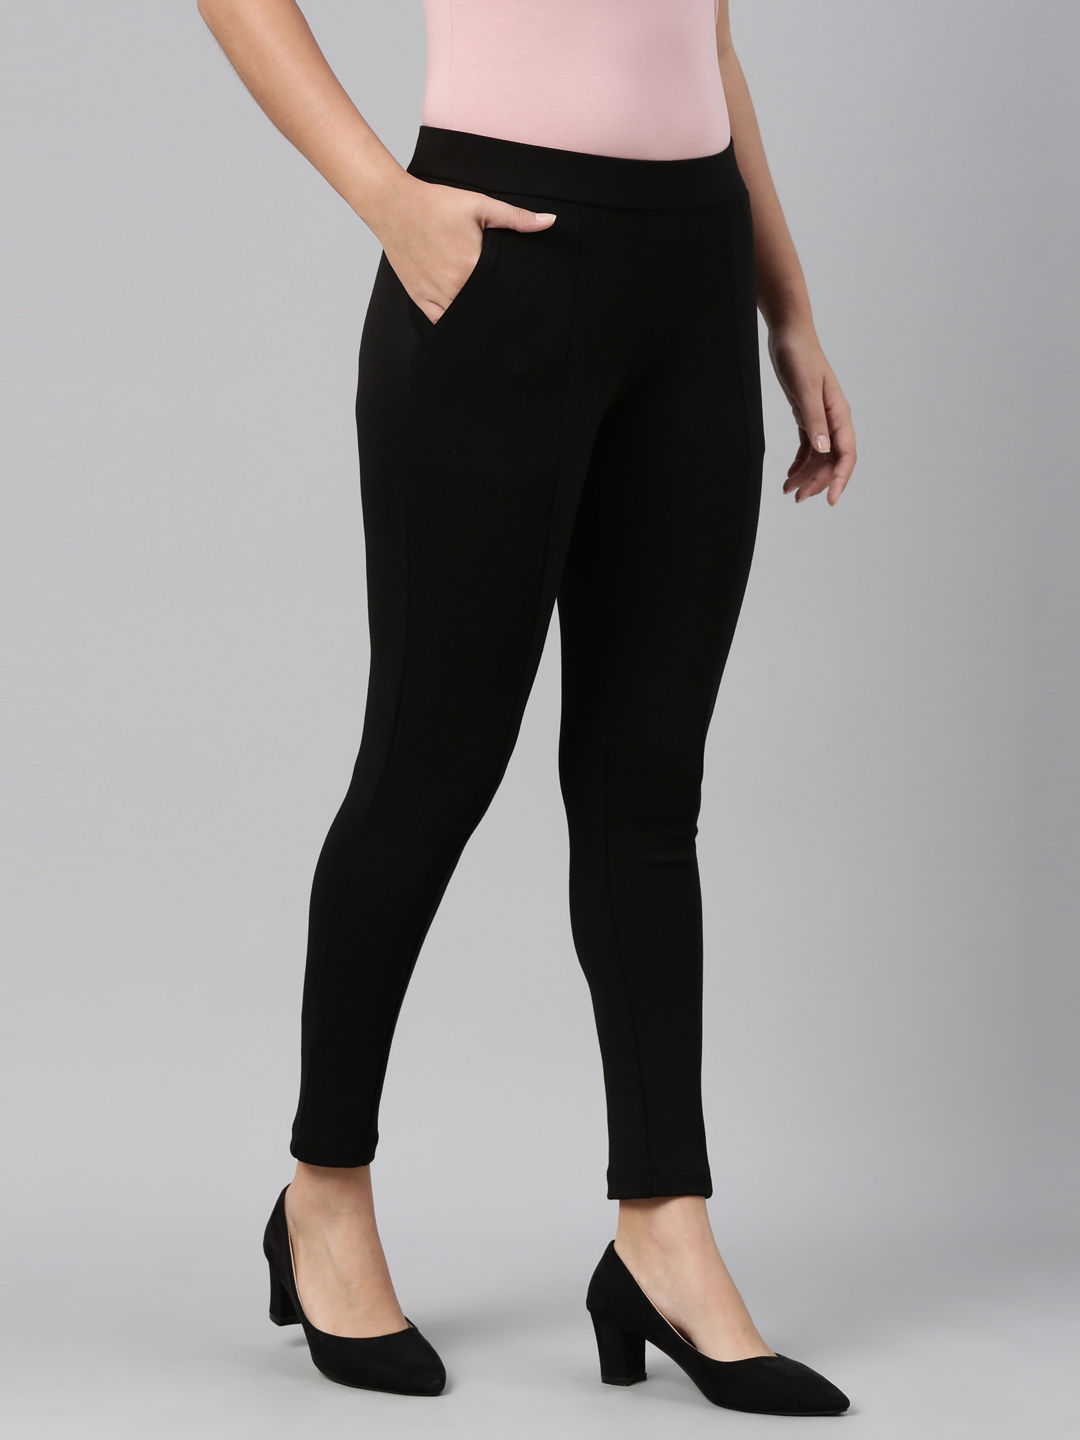 10 Black ponte pants outfits ideas  outfits work outfit casual outfits